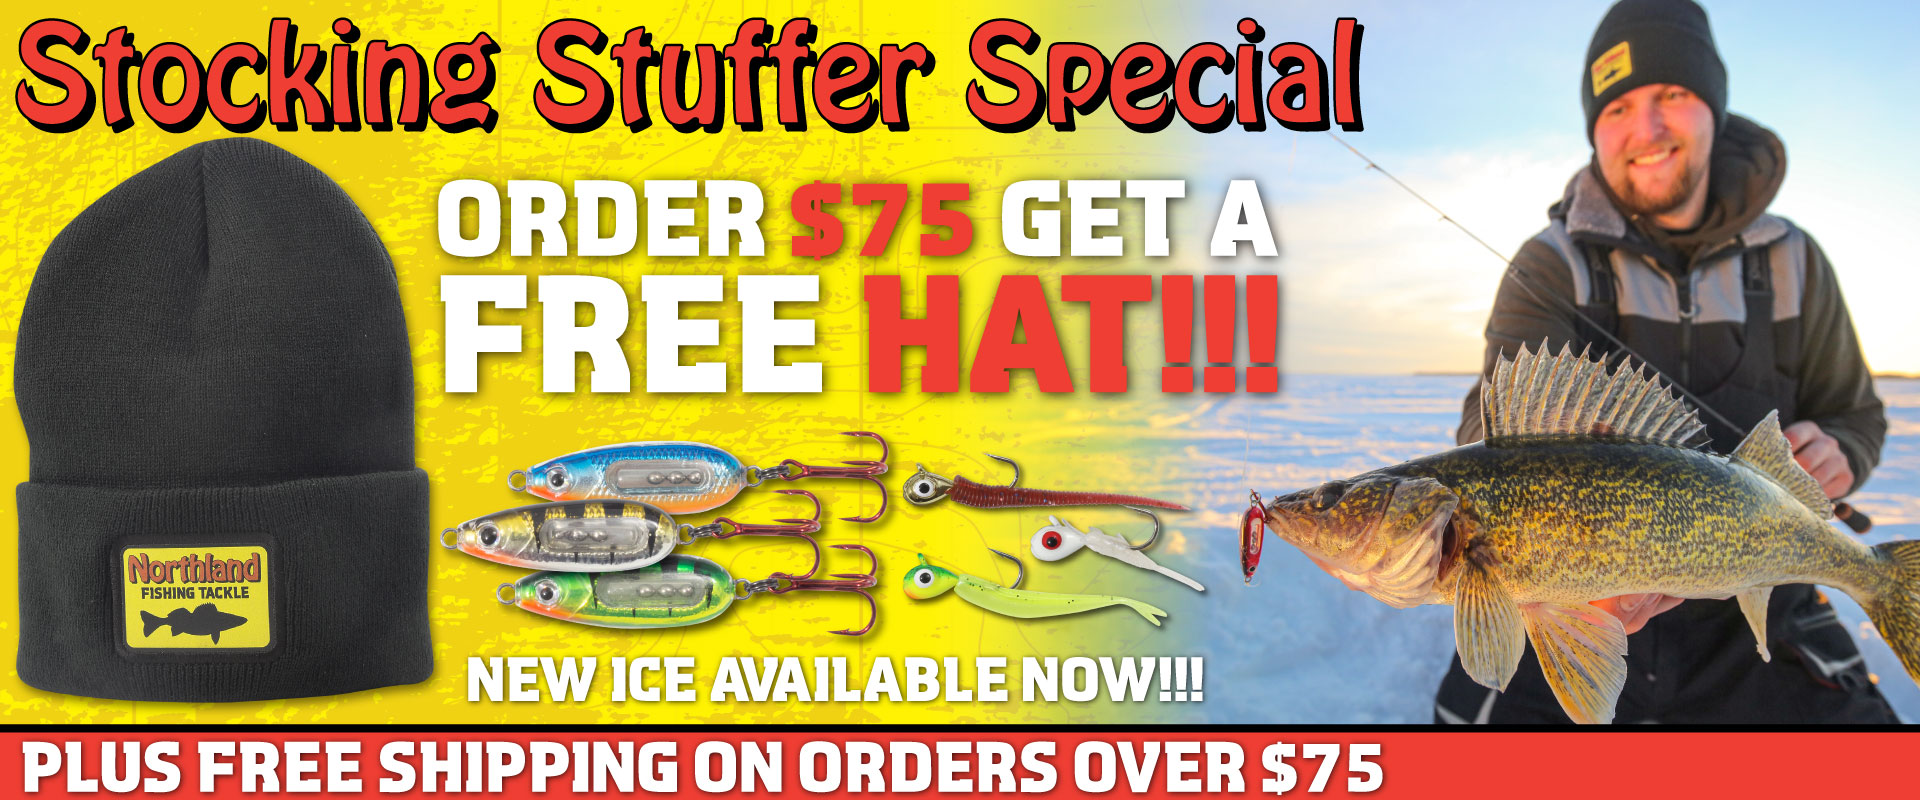 Northland Fishing Tackle Stocking Stuffer special, buy $75 and get a free stocking hat